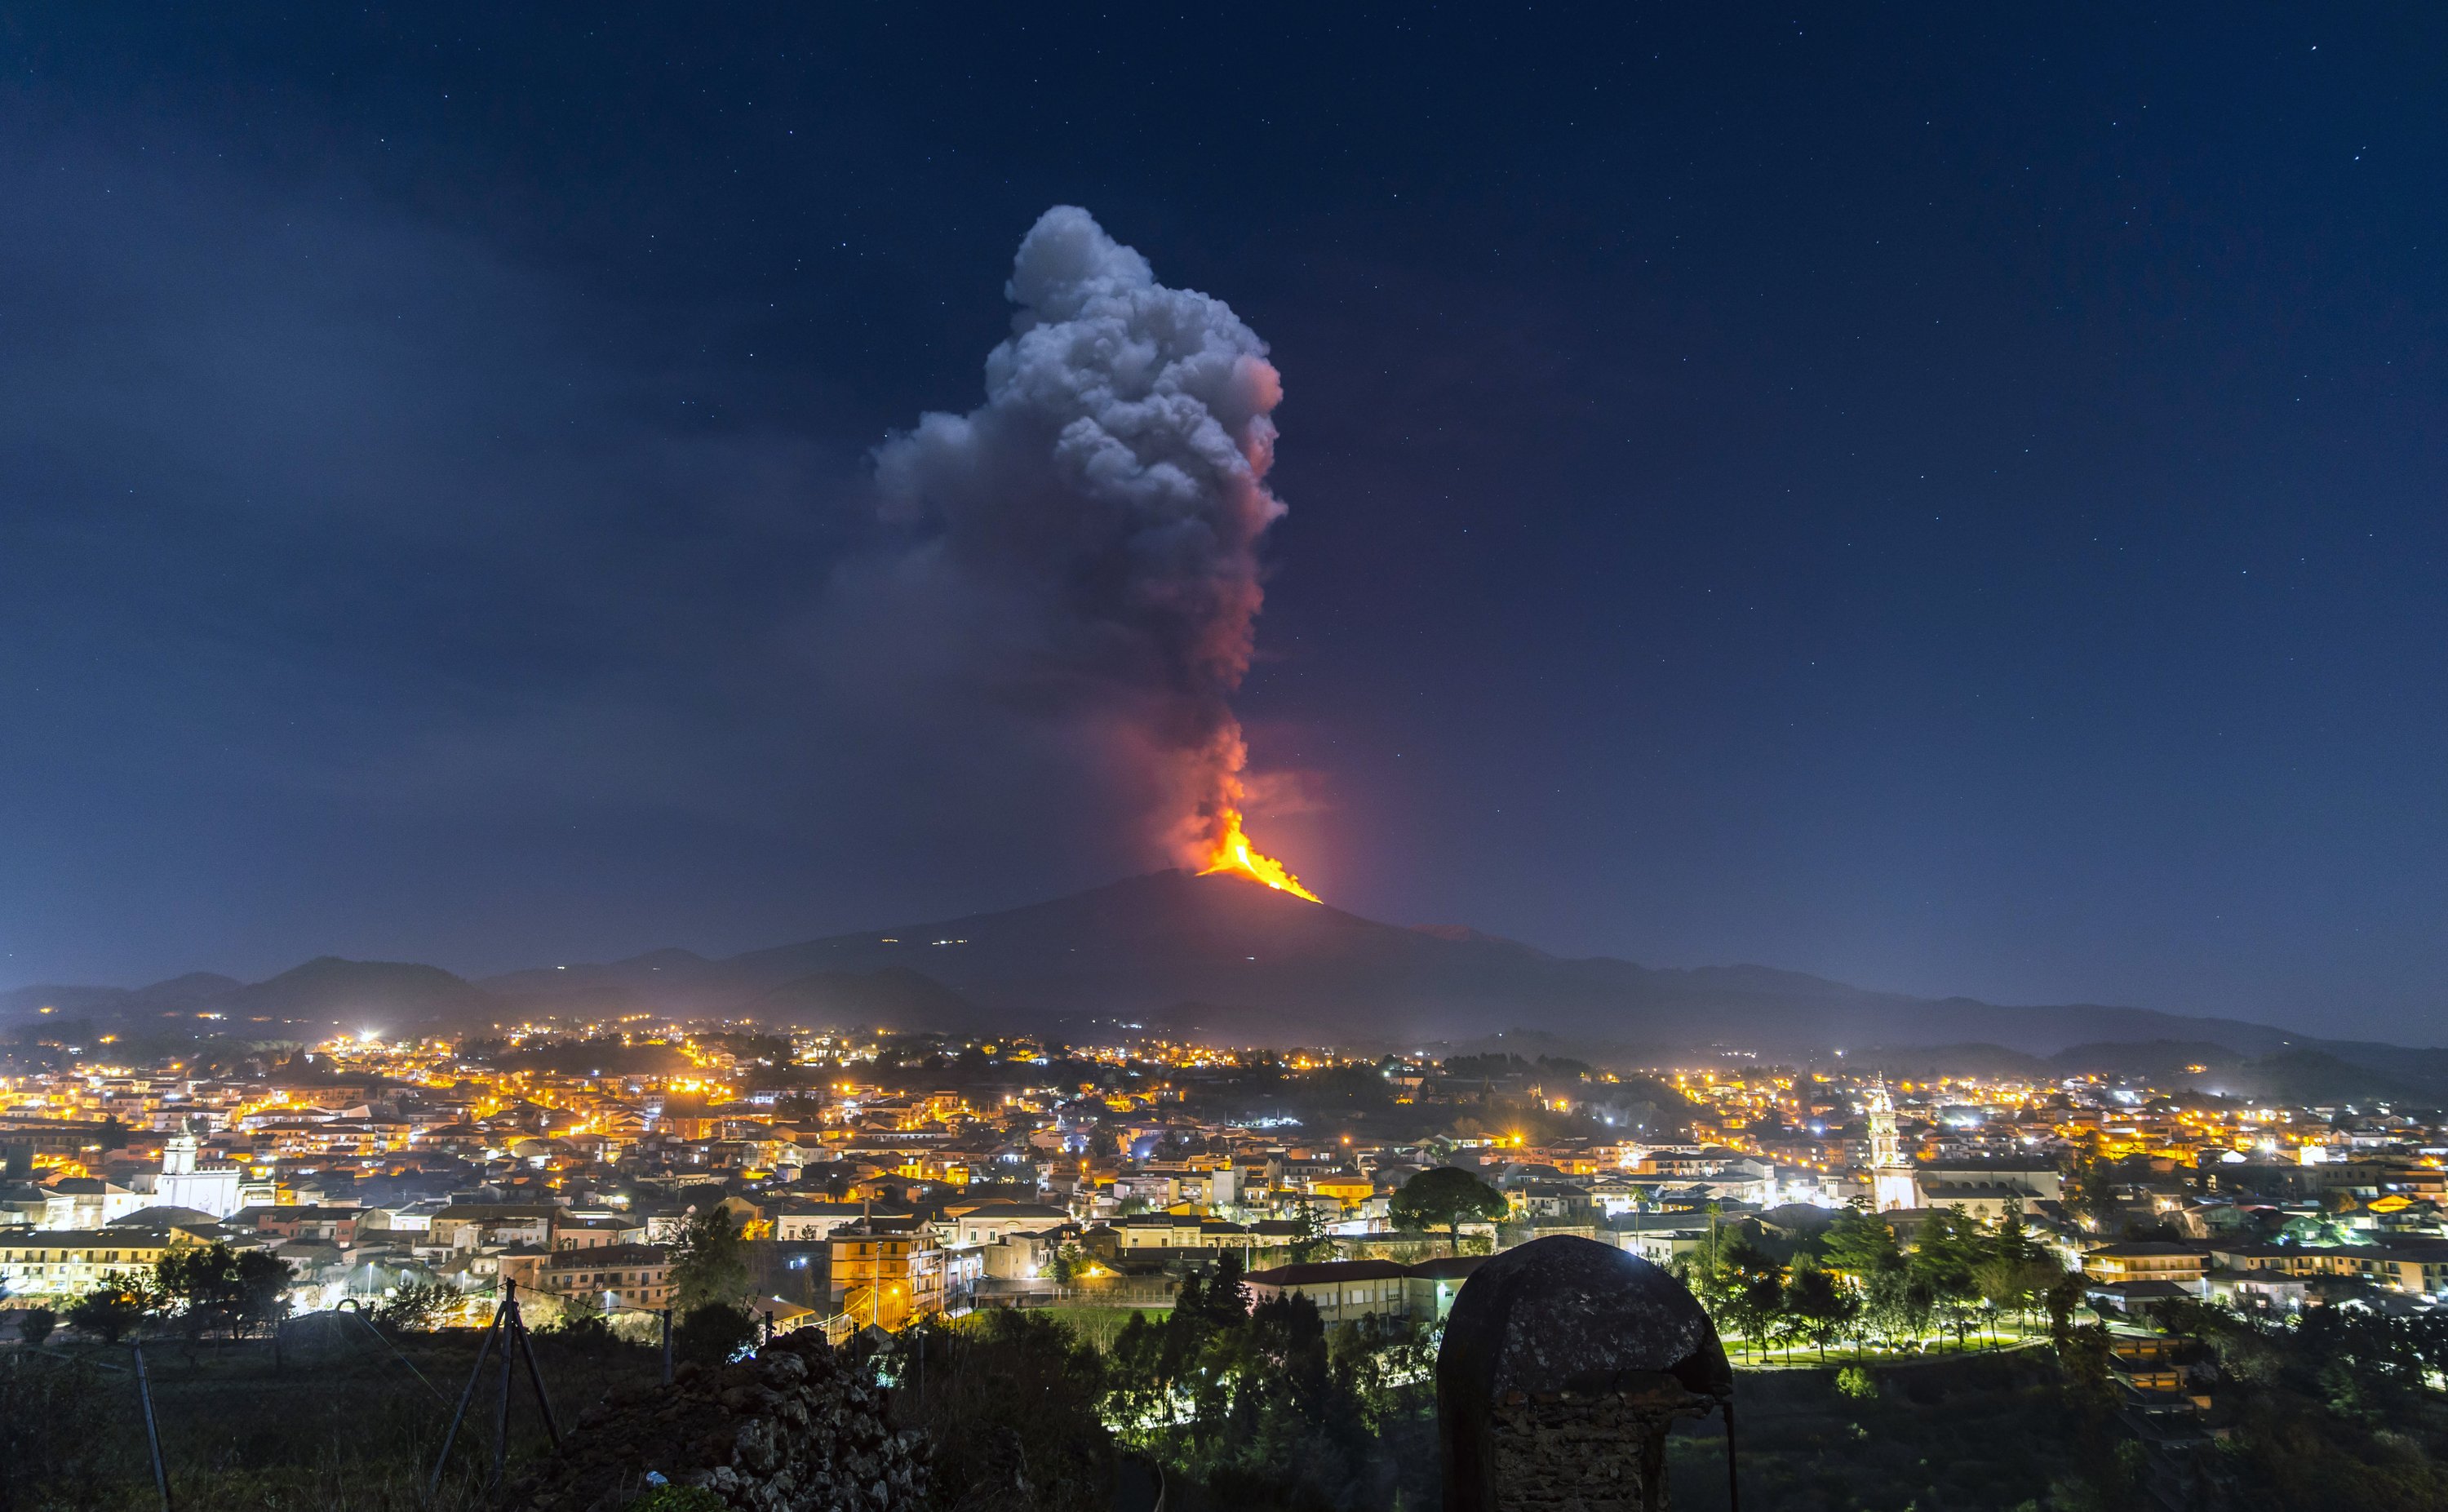 Mount Etna presents the latest spectacular spectacle